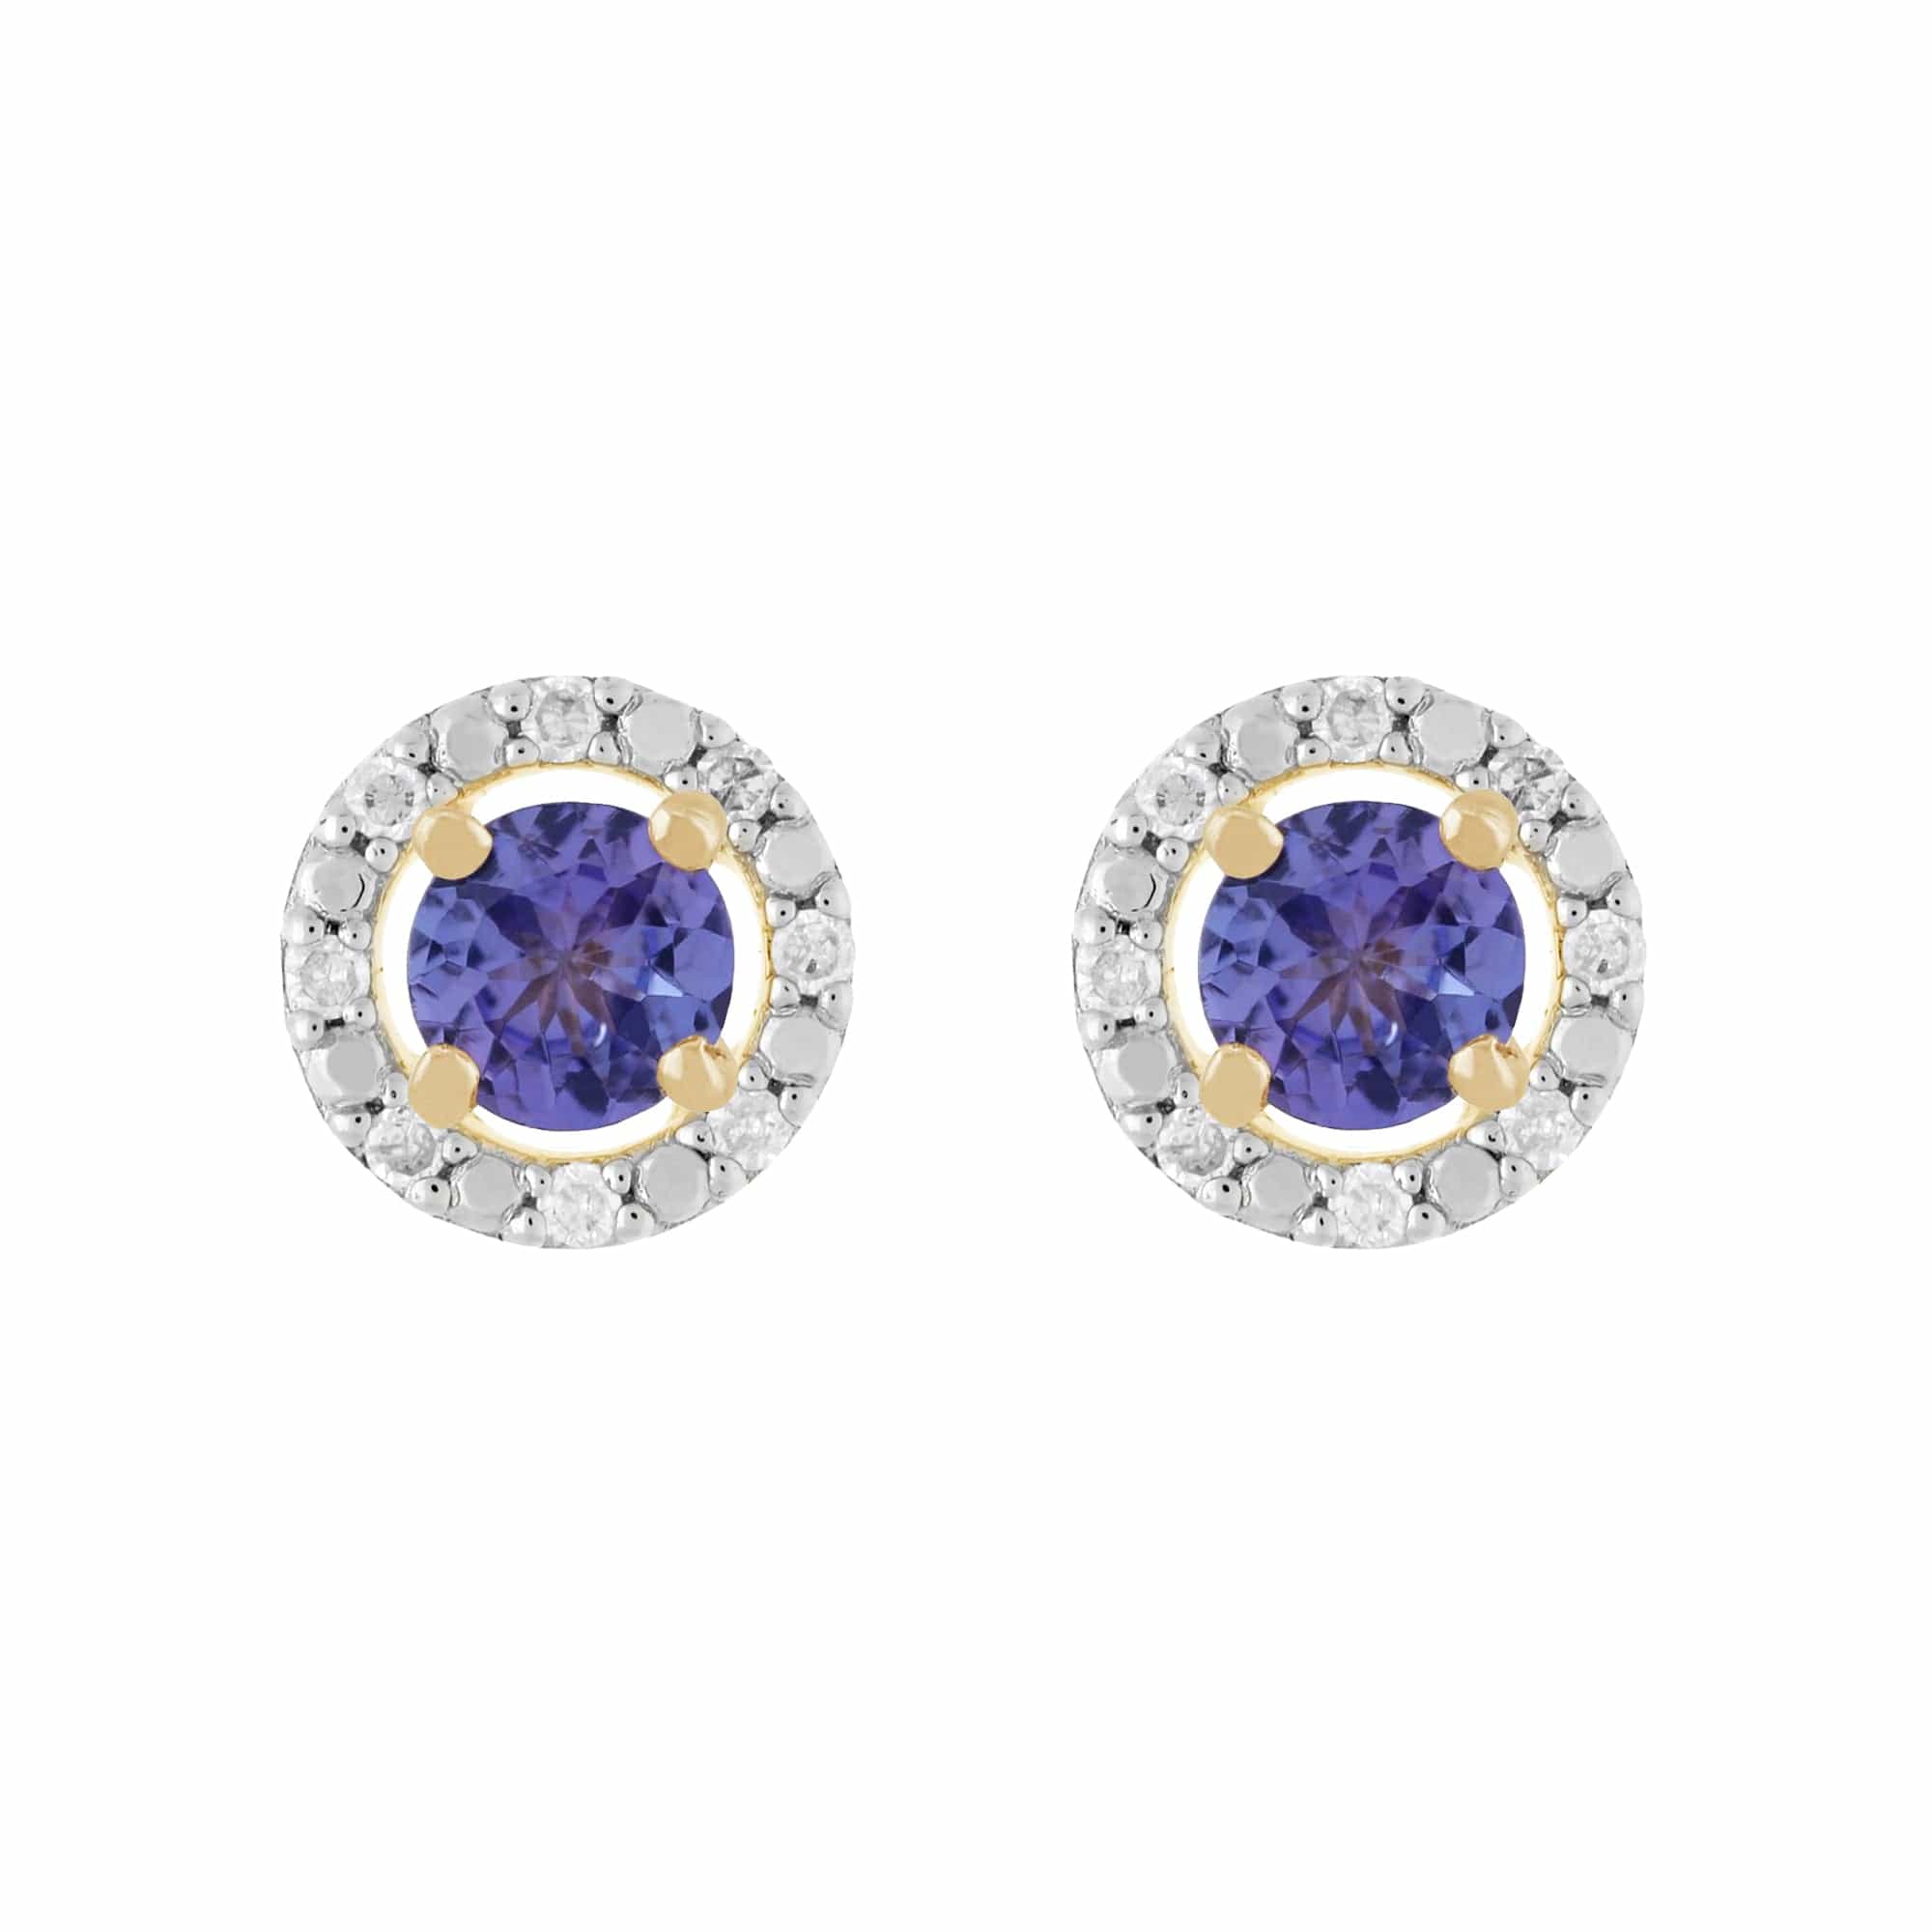 11557-191E0376019 Classic Round Tanzanite Stud Earrings with Detachable Diamond Round Earrings Jacket Set in 9ct Yellow Gold 1